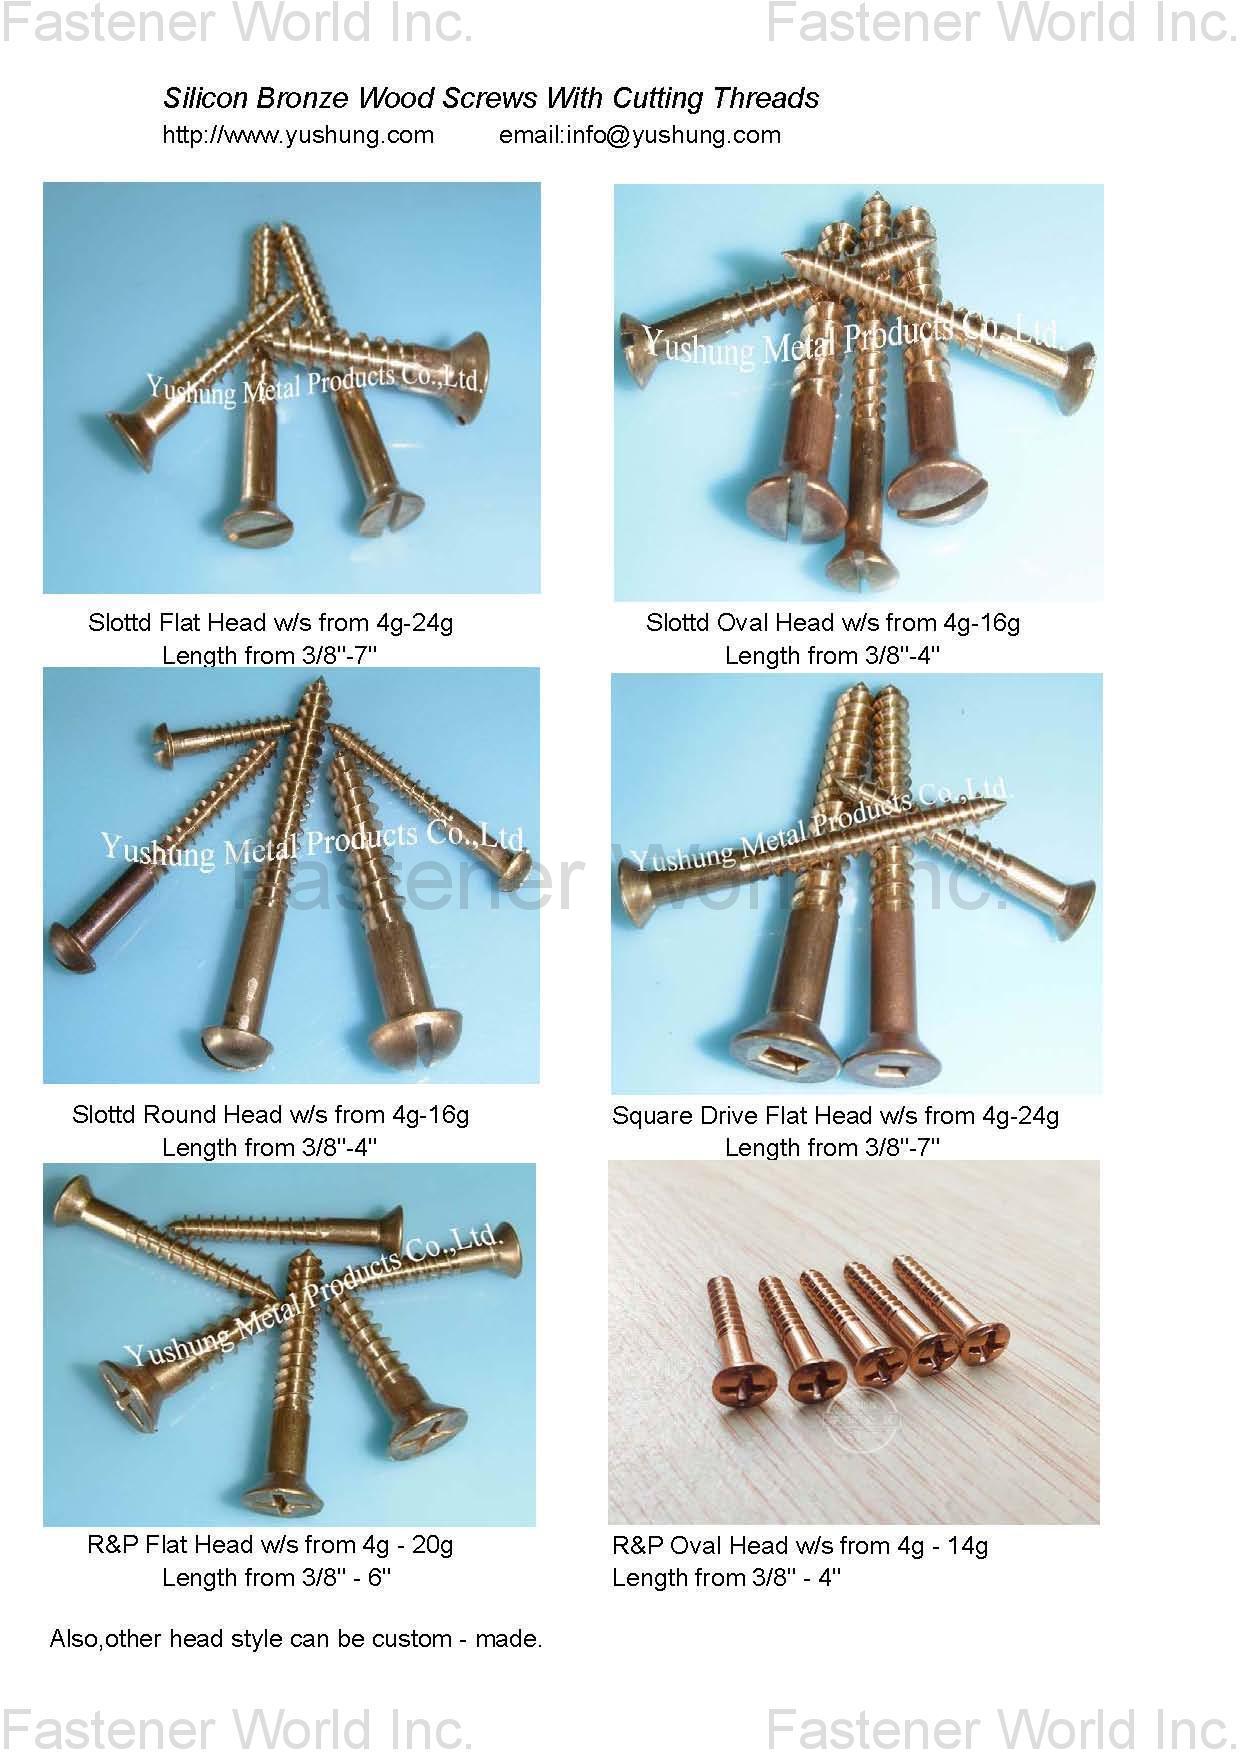 Chongqing Yushung Non-Ferrous Metals Co., Ltd. , Silicon Bronze Wood Screws with Cutting Threads Full Body